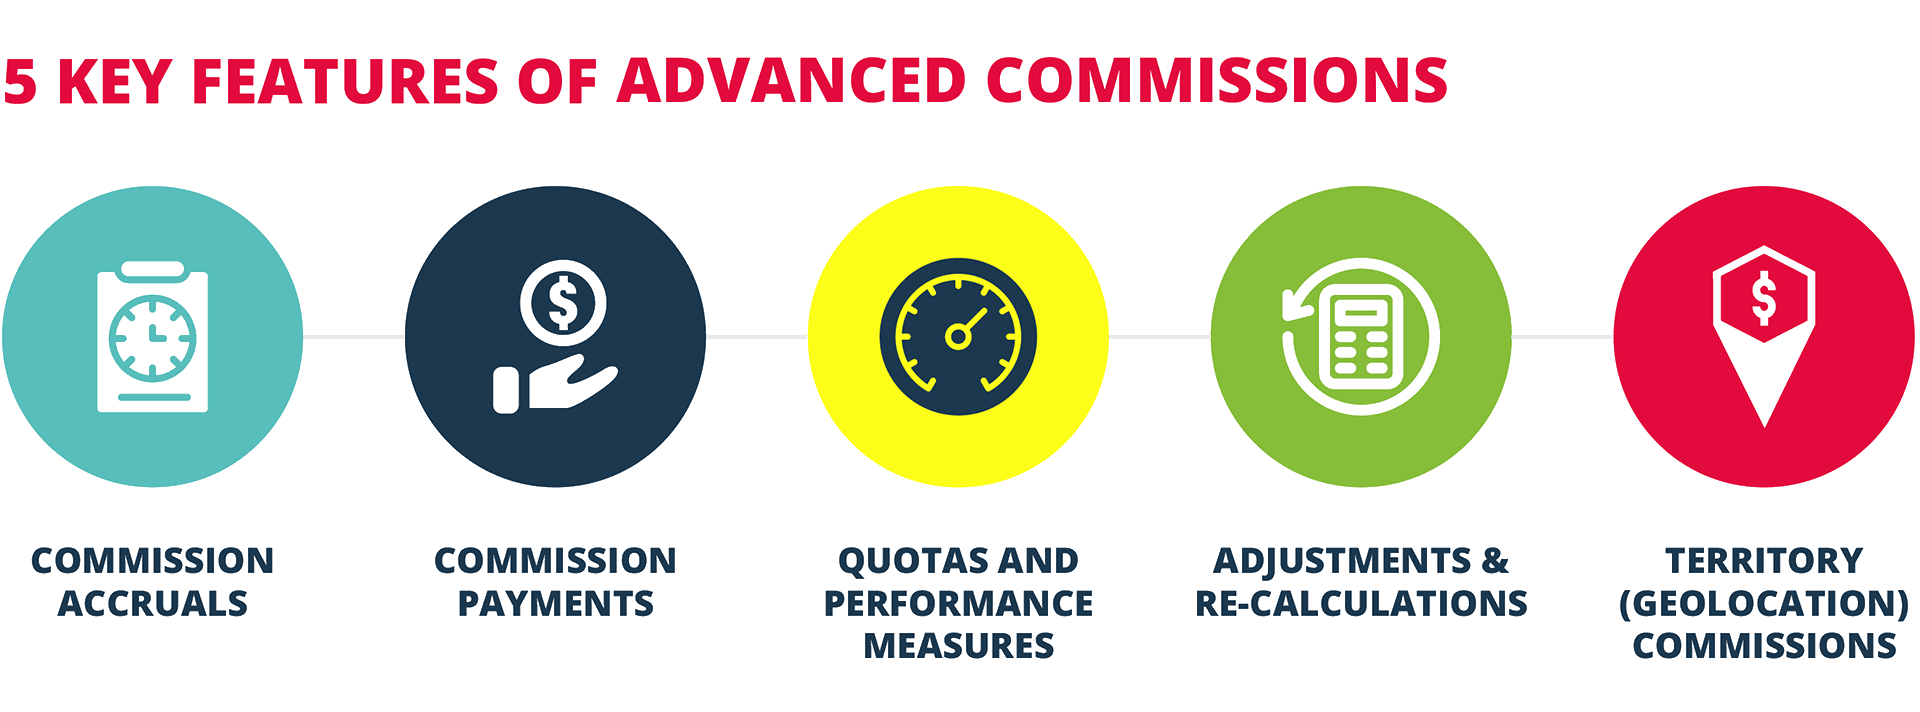 5 KEY FEATURES OF ADVANCED COMMISSIONS